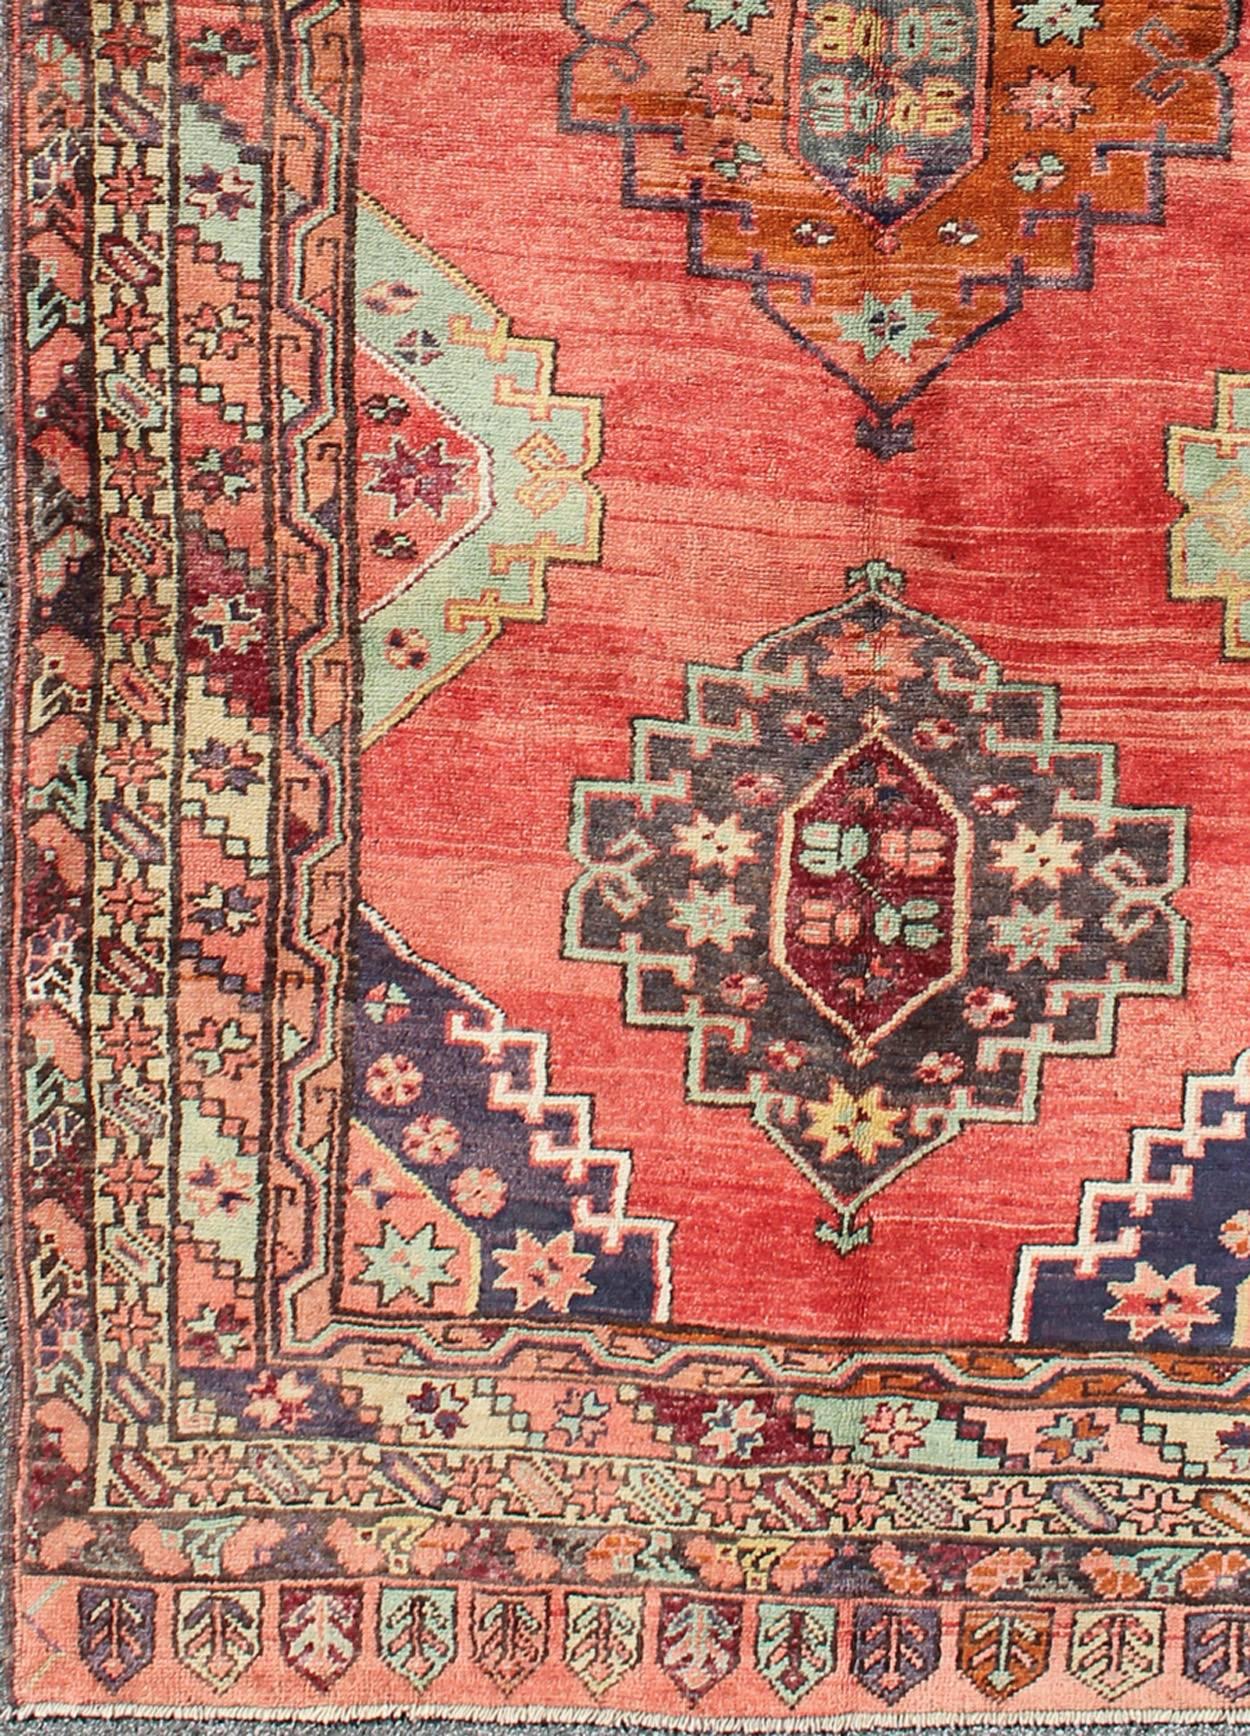 Red field vintage Turkish Oushak rug with vertical geometric medallions, rug en-140058, country of origin / type: Turkey / Oushak, circa 1940

This vintage Turkish Oushak gallery rug (circa mid-20th century) features a unique blend of colors and